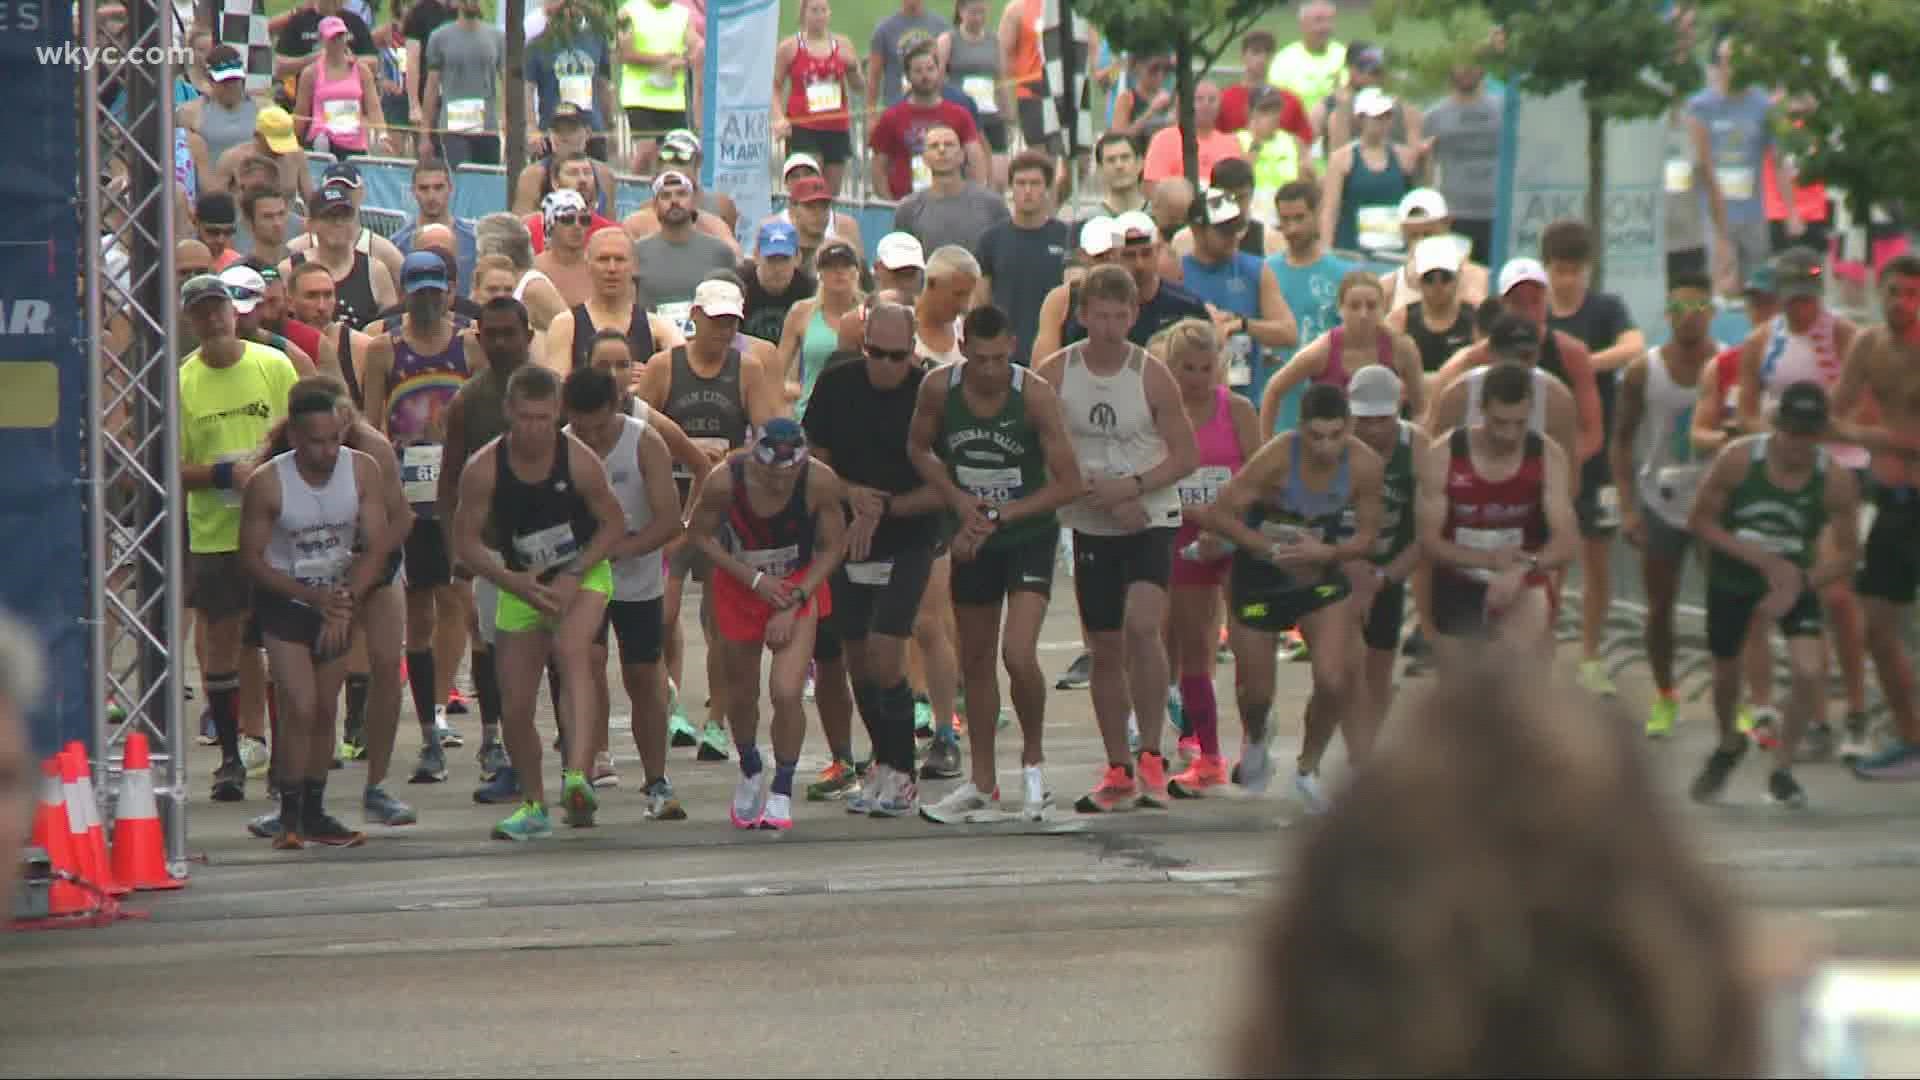 Akron Marathon is also making it easy to show your support from home by livestreaming the race, starting at 6:30 a.m. on the Akron Marathon facebook page.